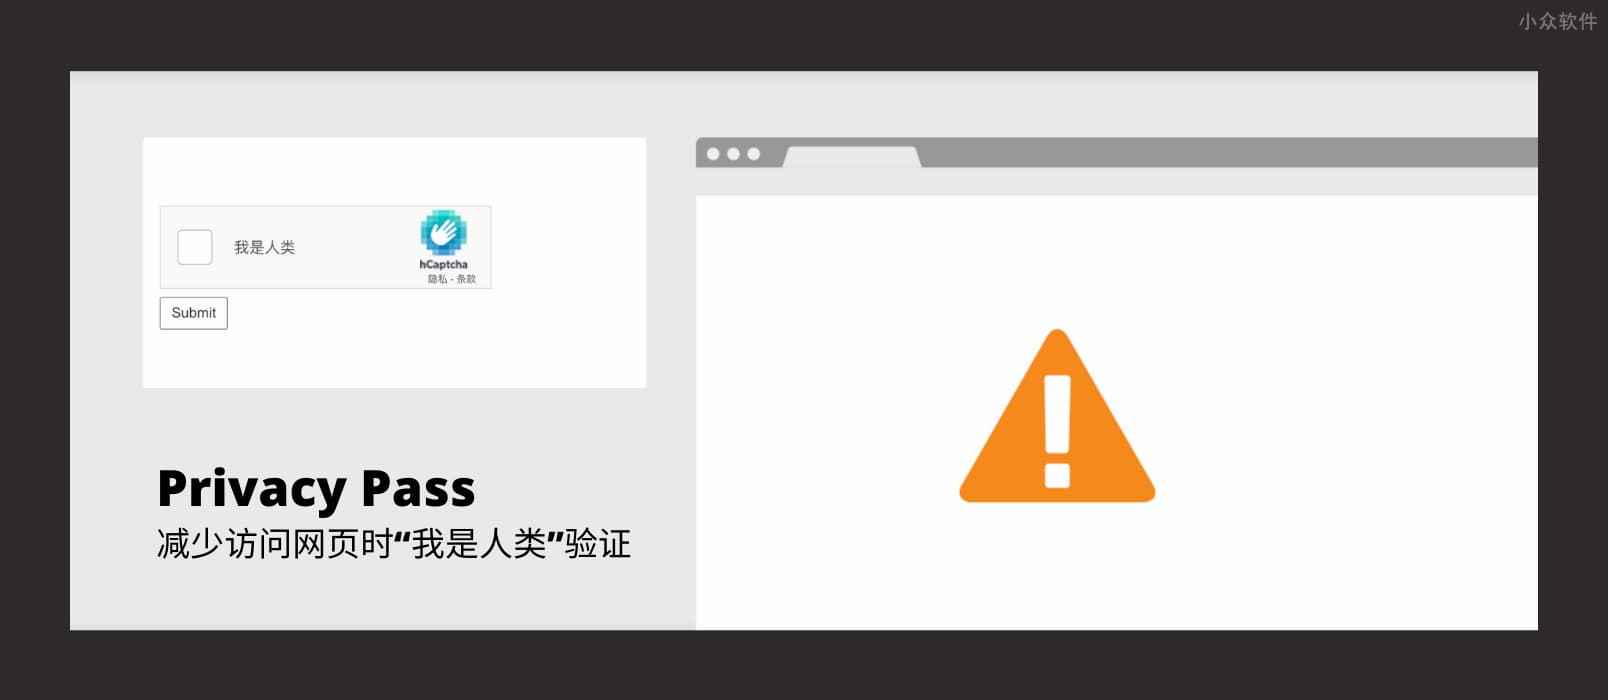 Privacy Pass - 由 Cloudflare、hCaptcha 提供，减少访问网页时“我是人类”验证[Chrome/Firefox] 1